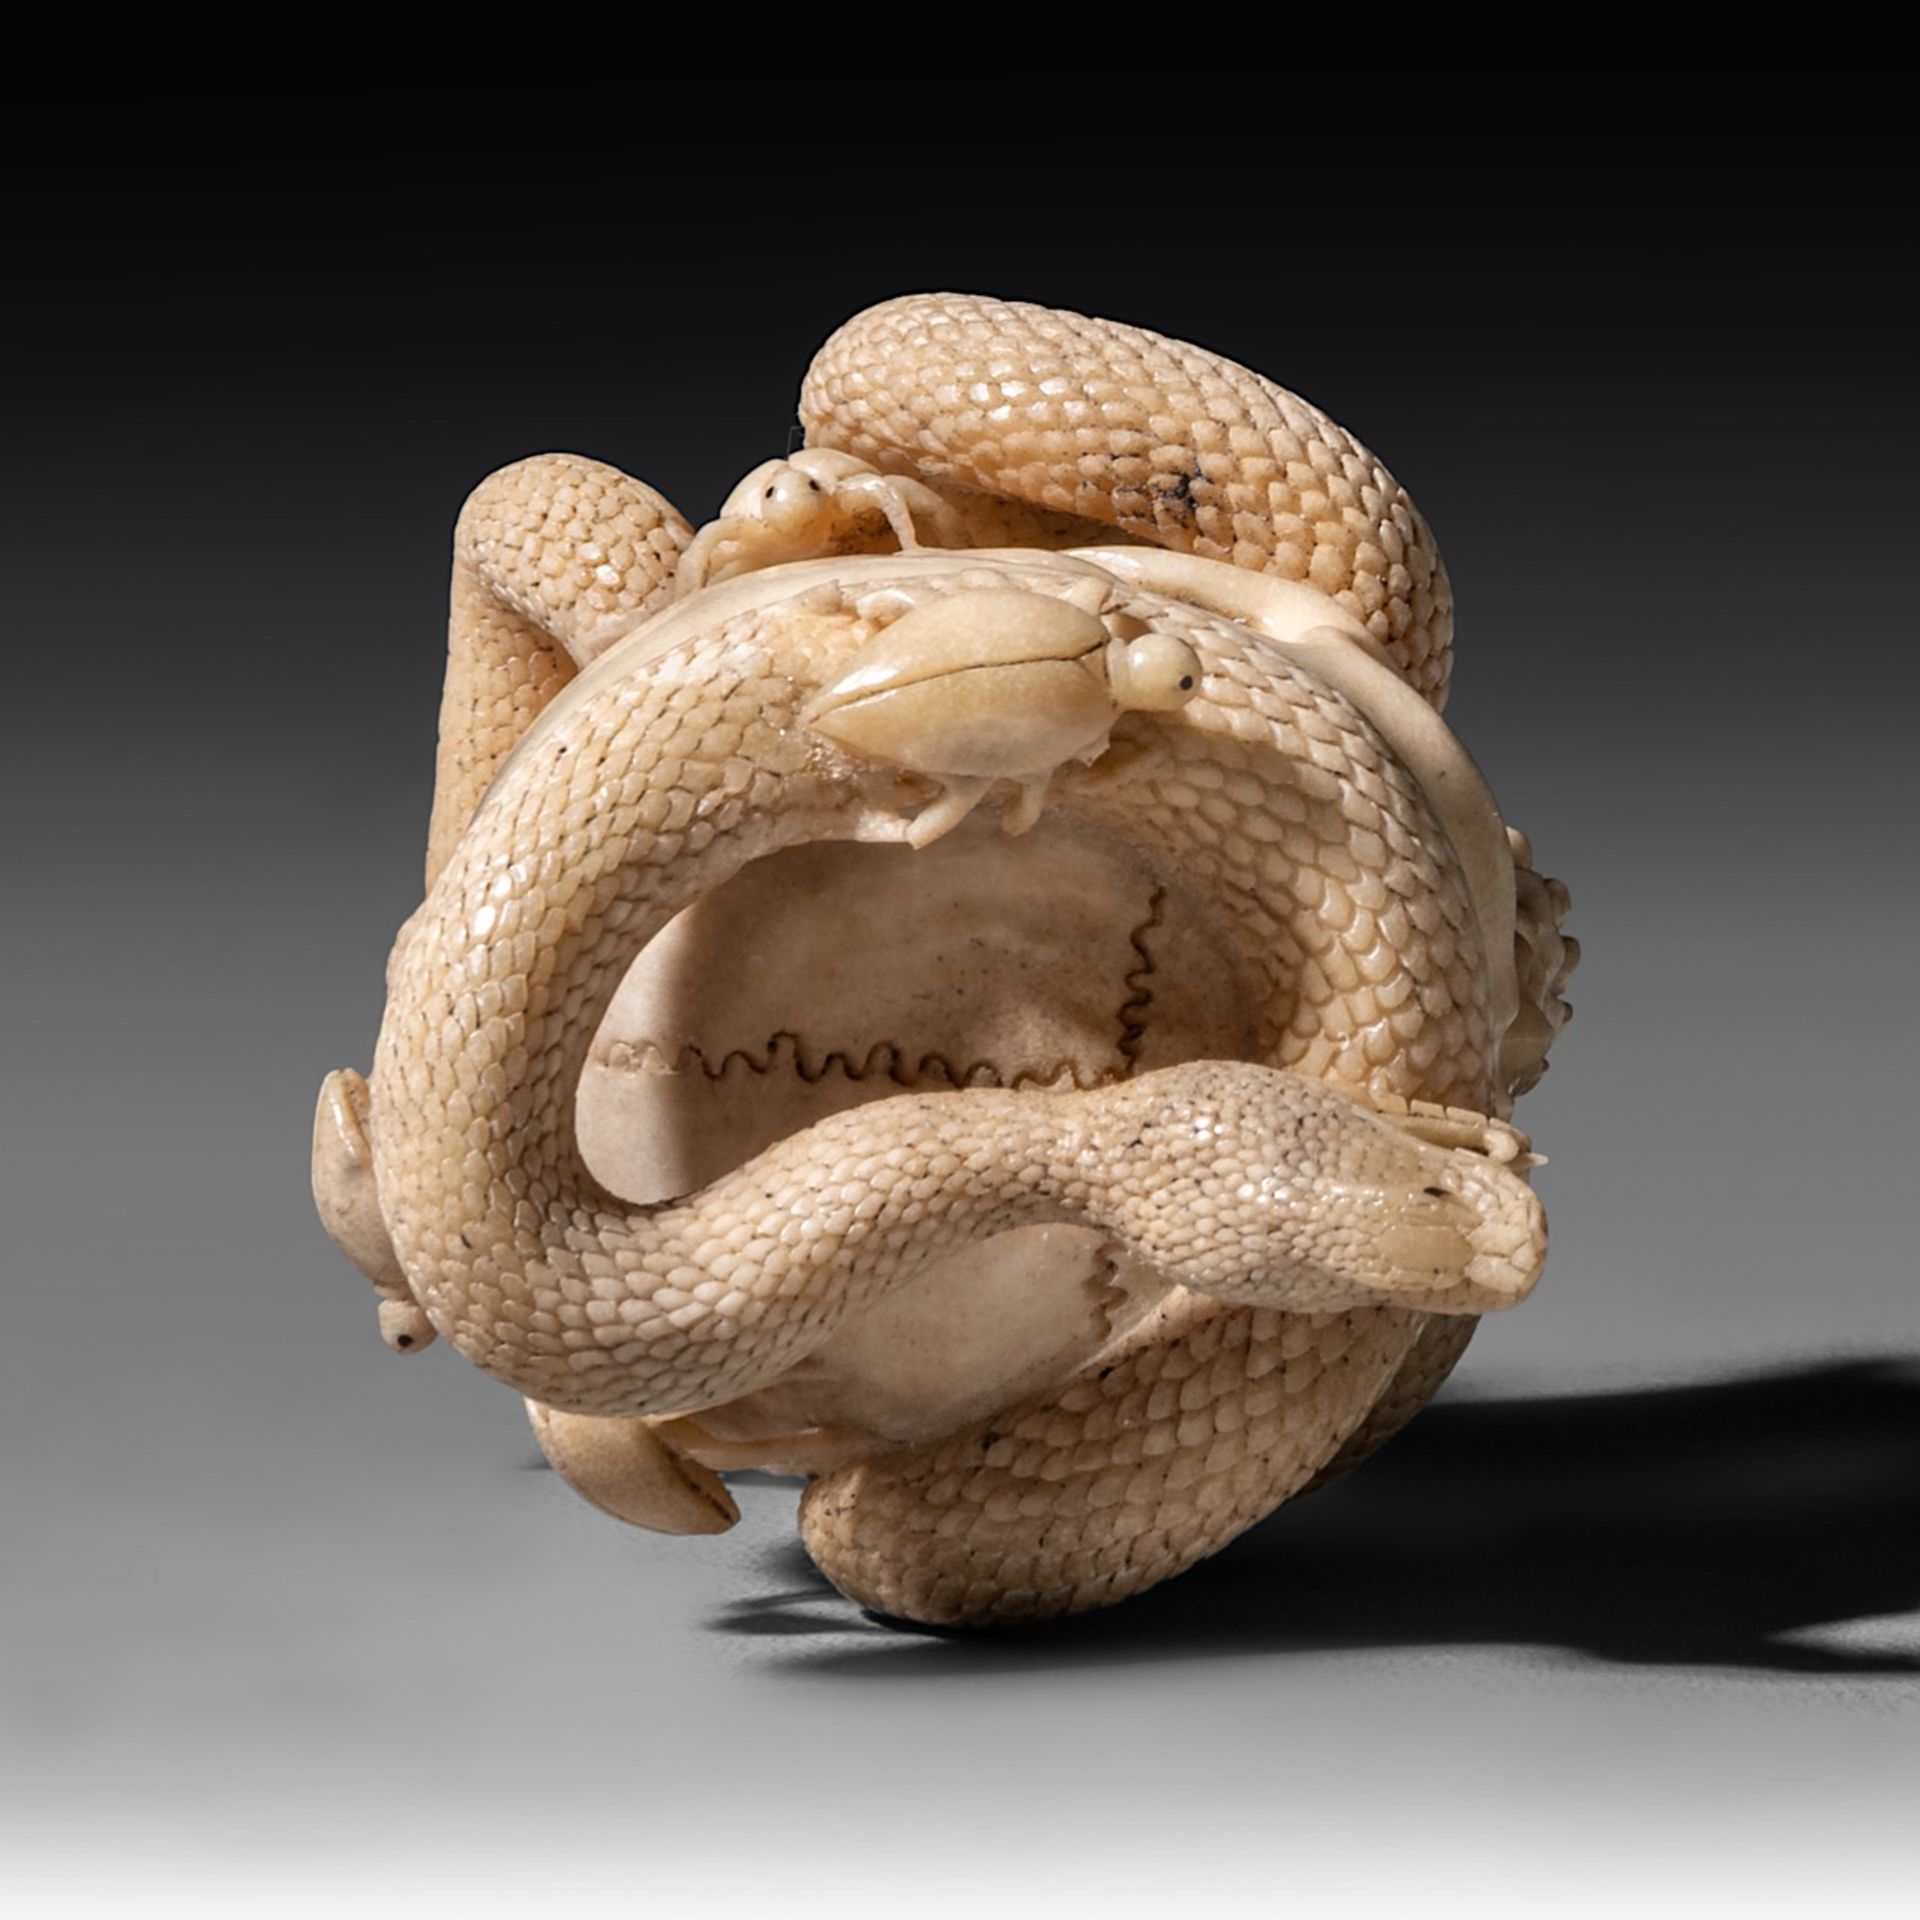 A (German) skull and snake sculpture, bone, 18th - 19th century, H 7,9 cm - weight 79 g - Image 8 of 9